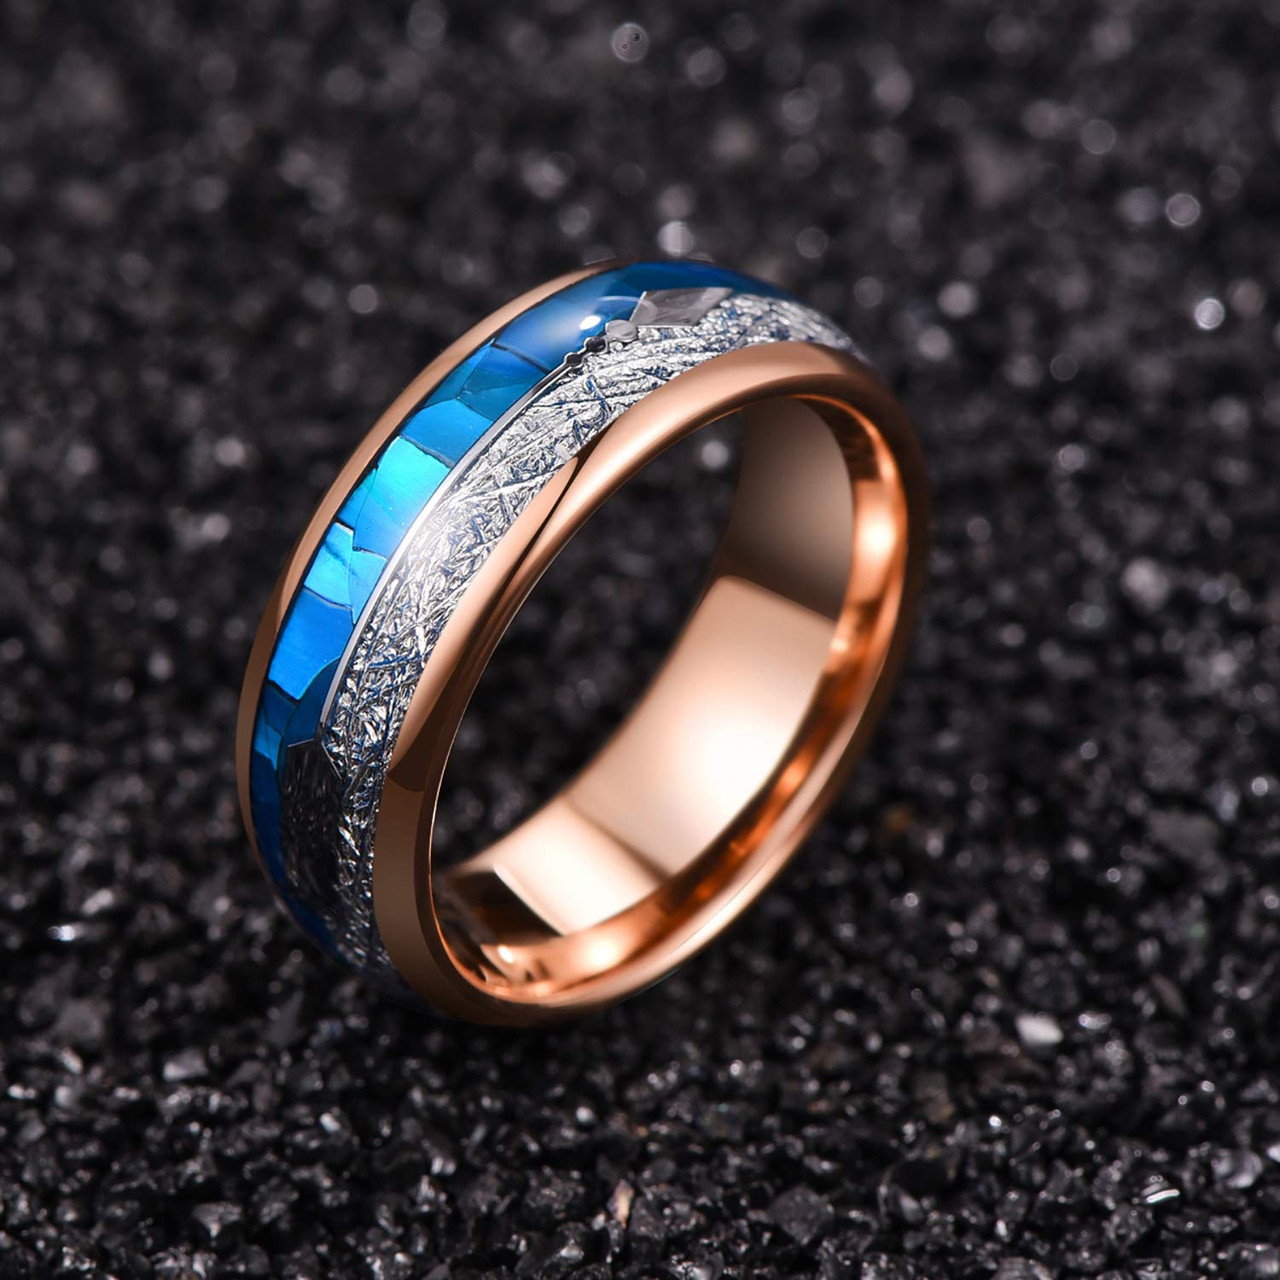 (8mm) Unisex or Men's Tungsten Carbide Wedding ring bands. Rose Gold Tone Band with Cupid's Arrow over Blue Shell and Inspired Meteorite Inlay. Tungsten Carbide Domed Top Ring.